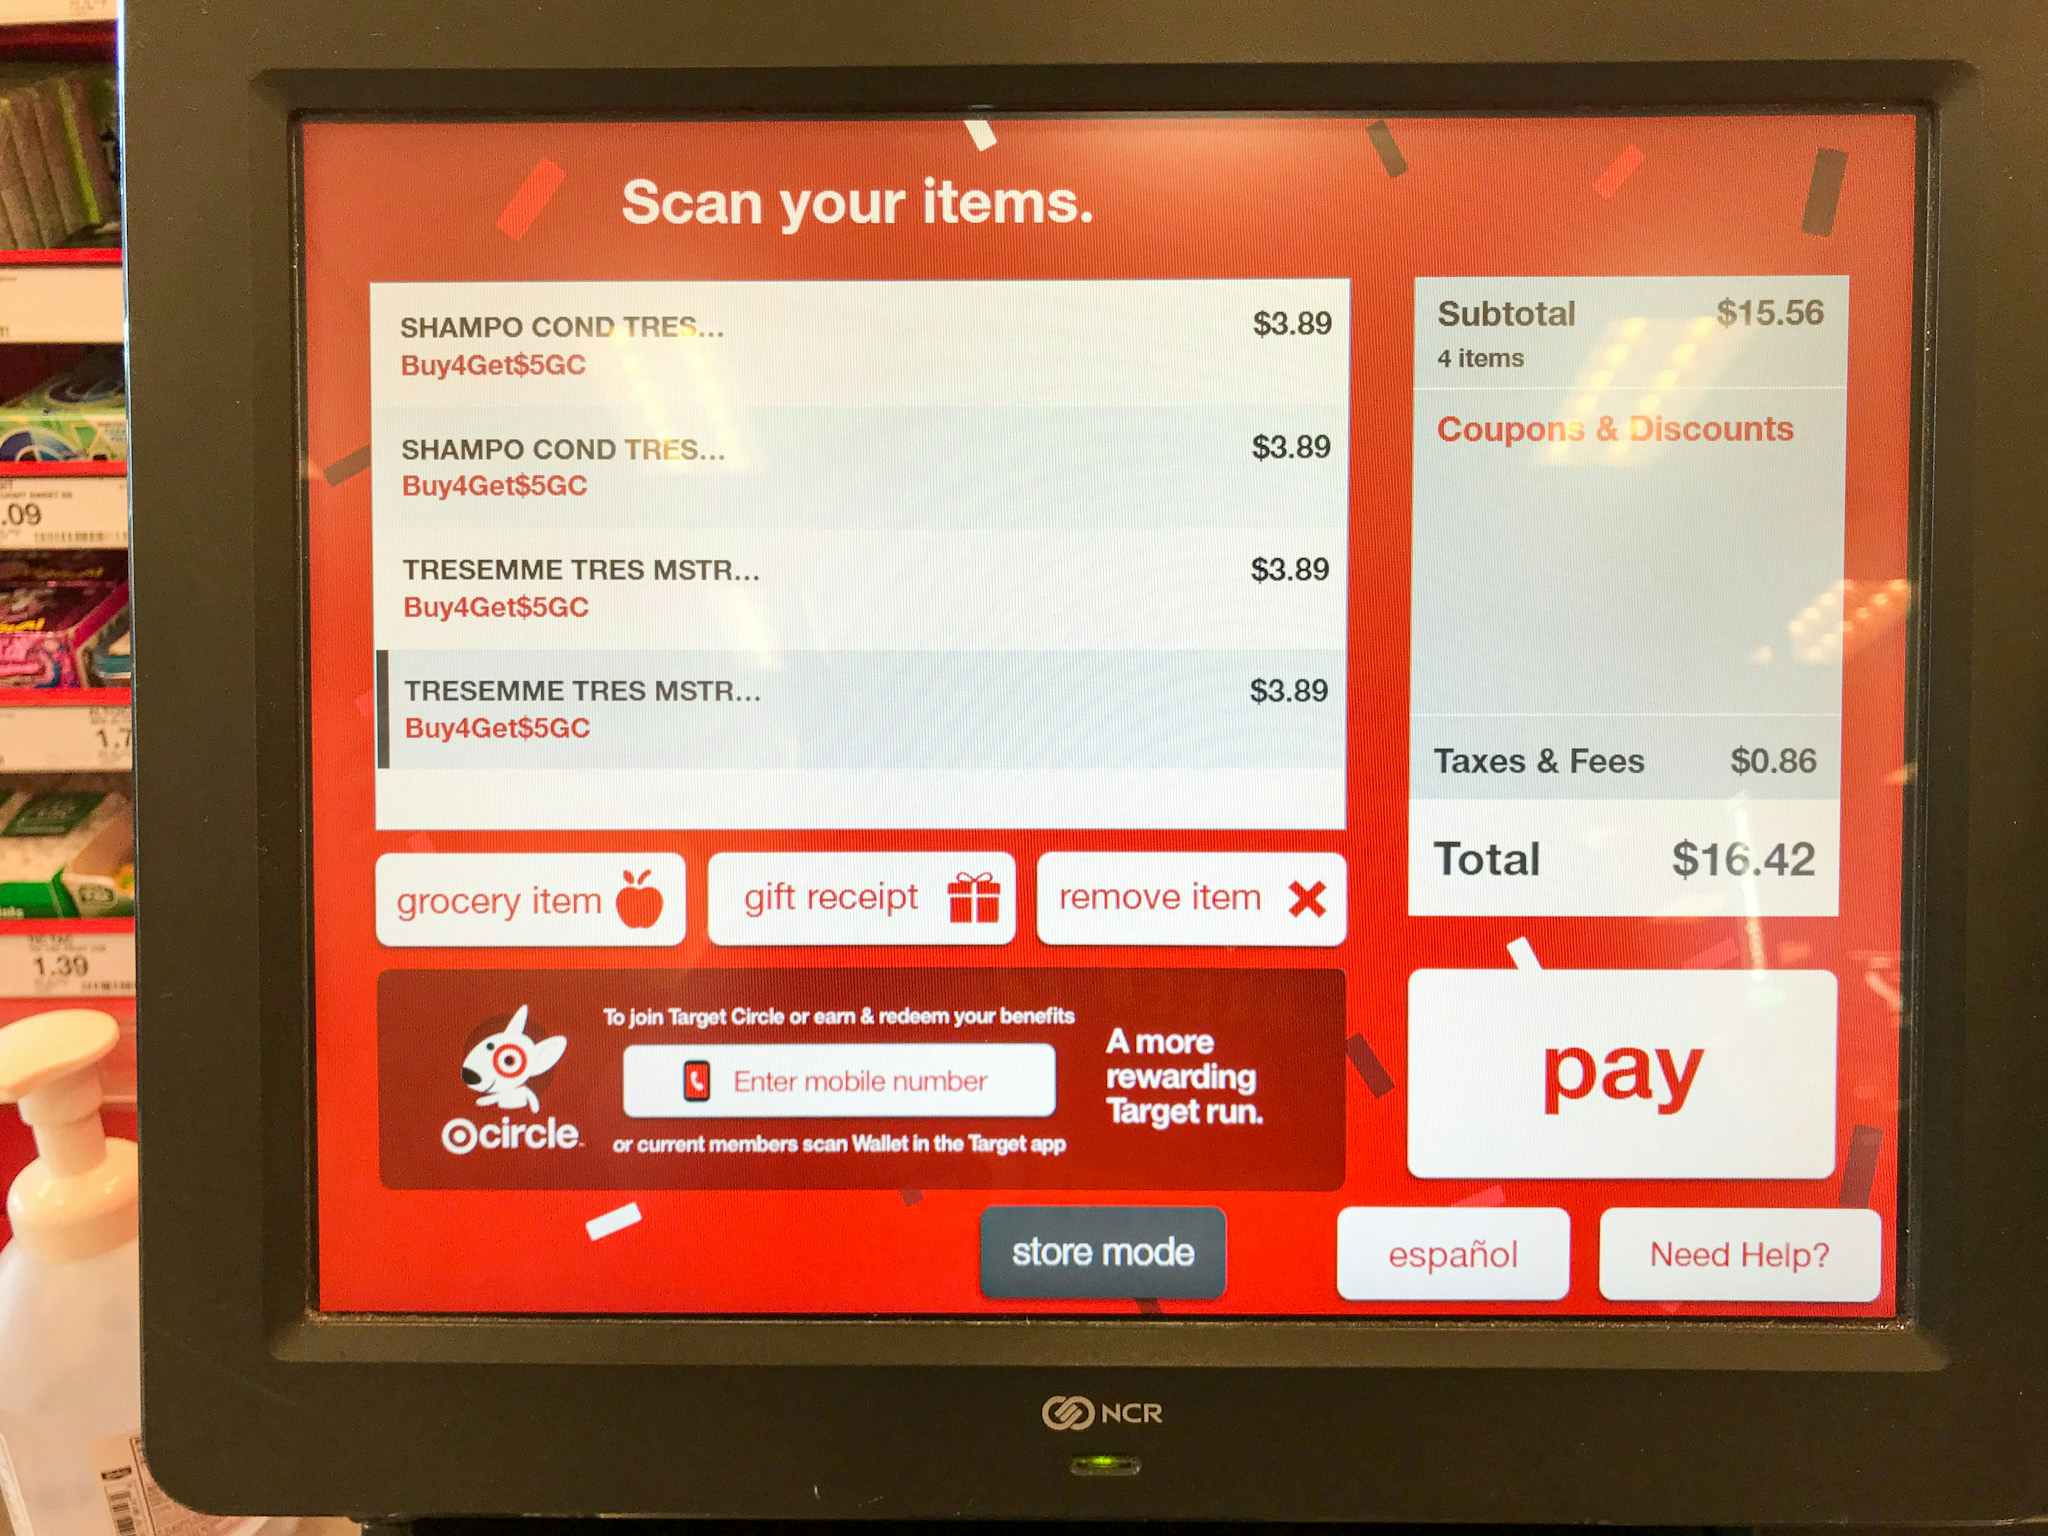 tresemme checkout screen at target